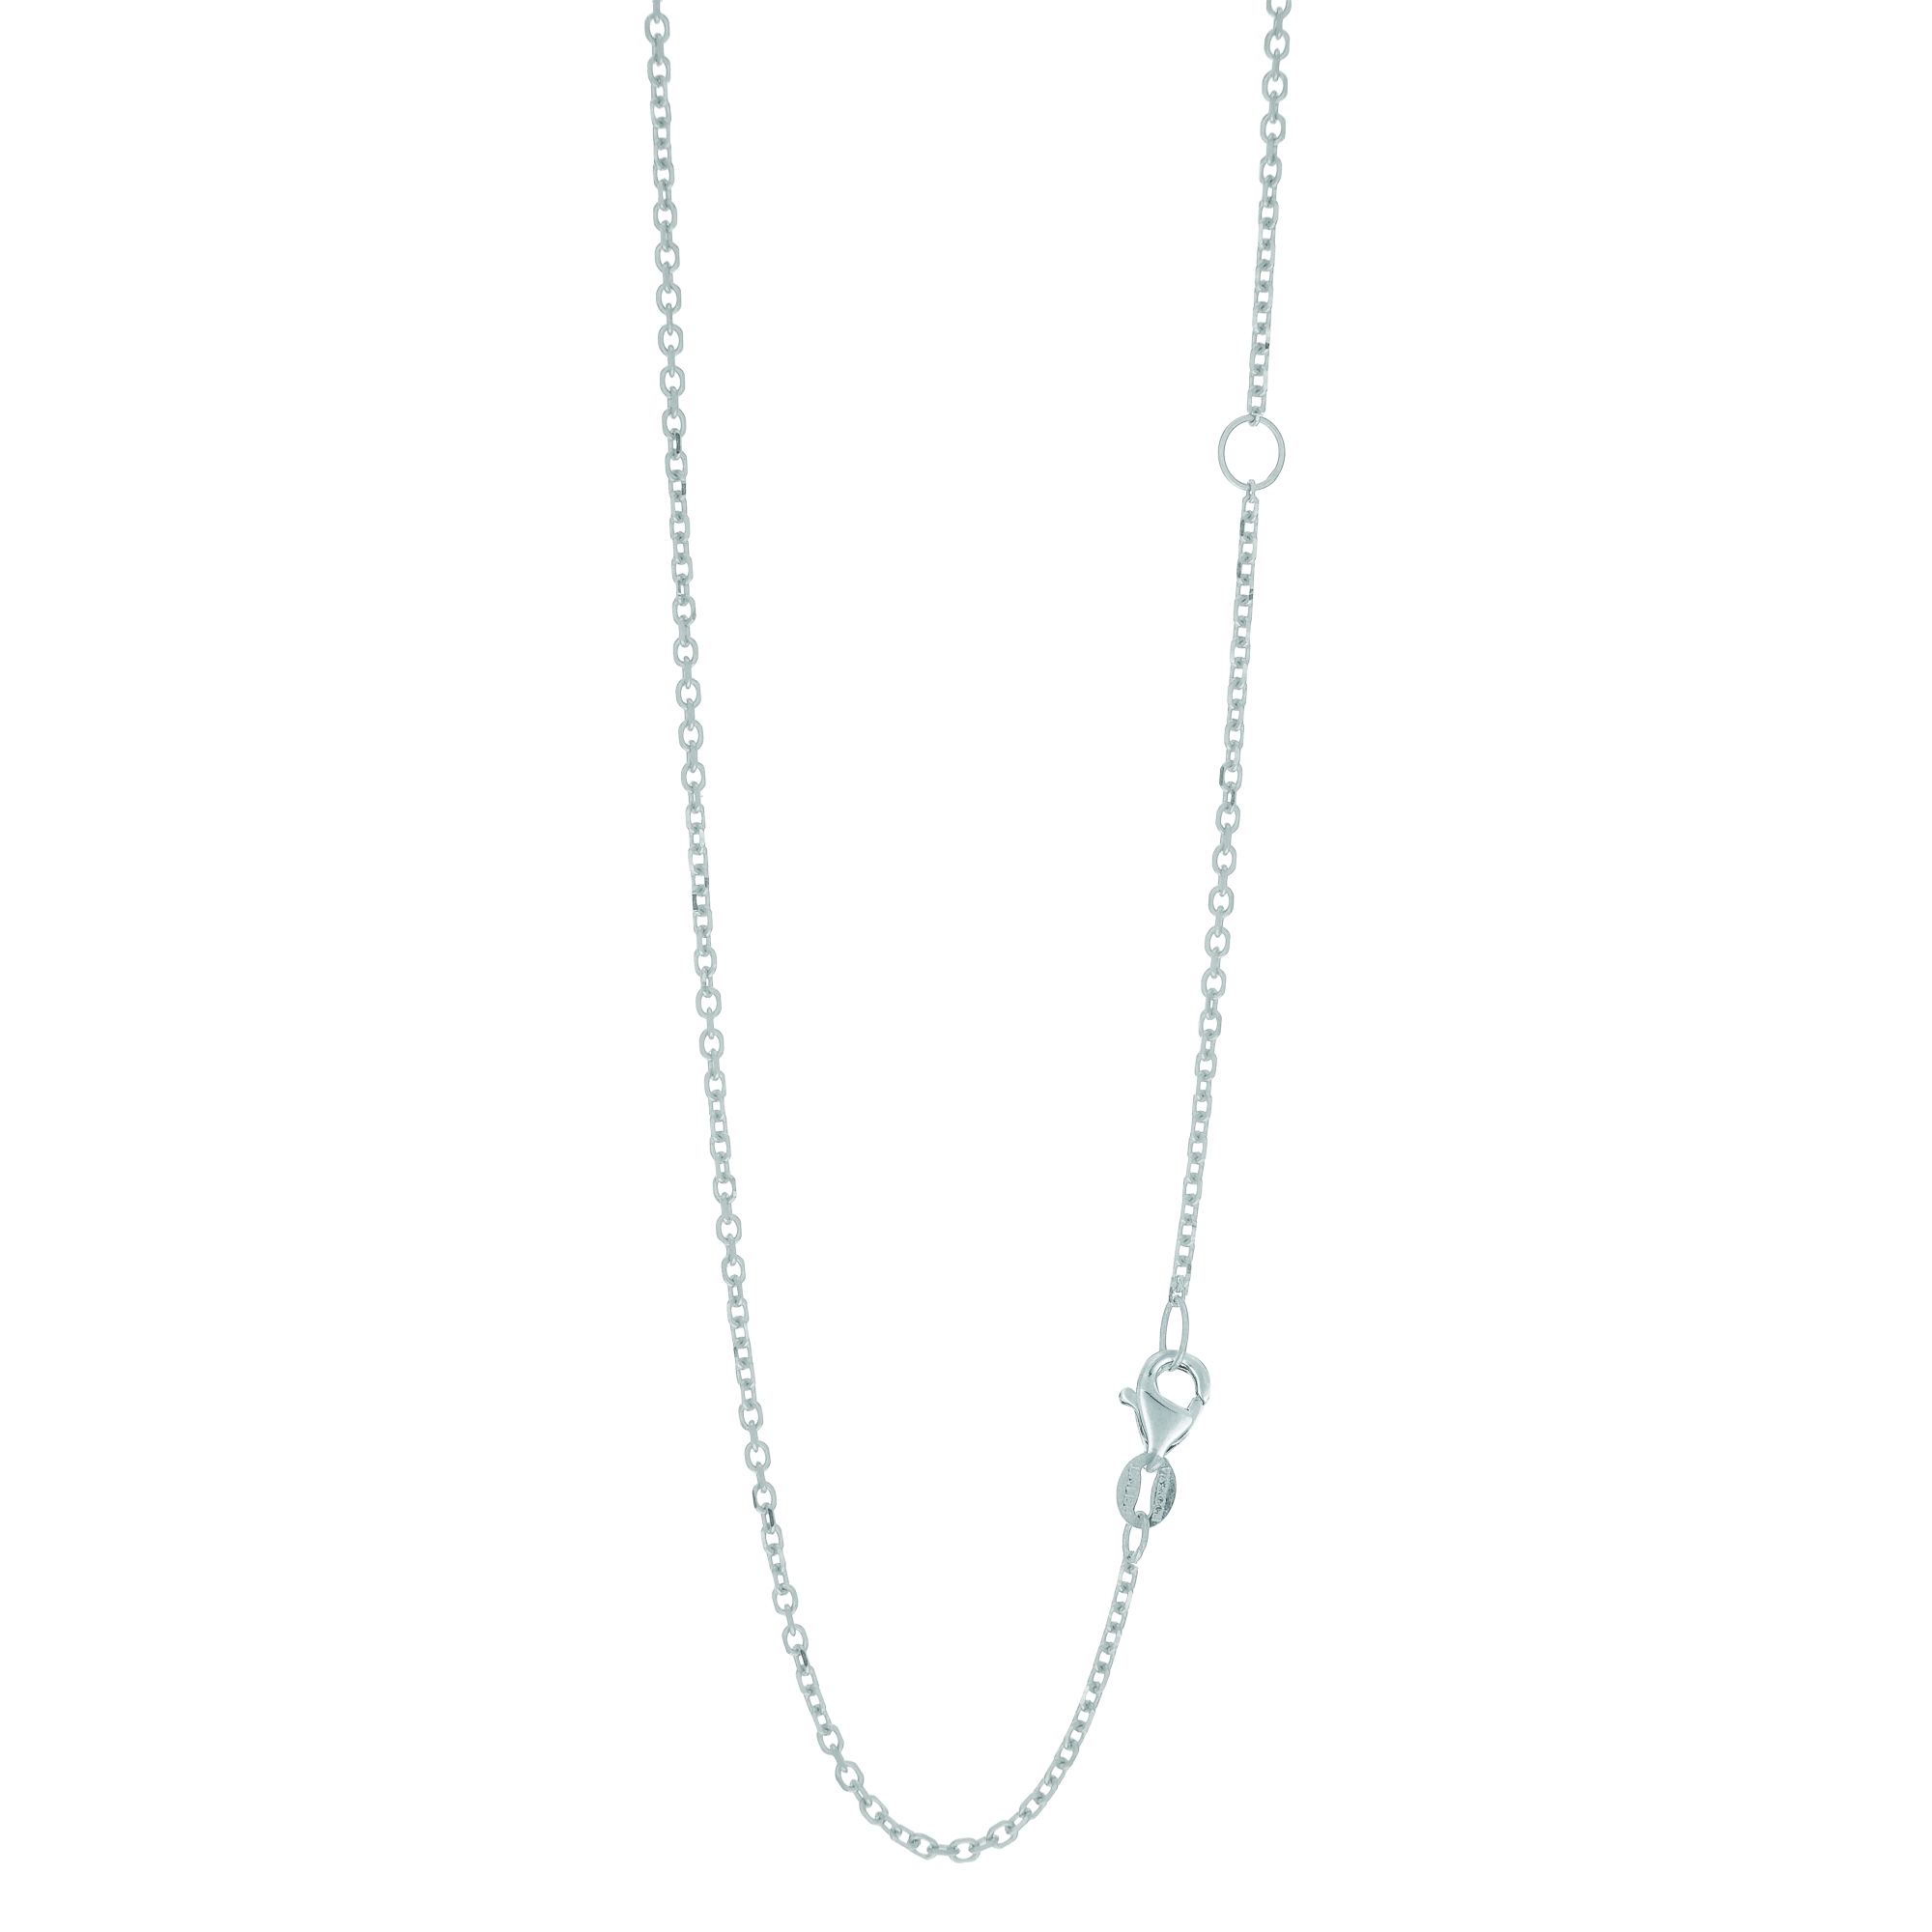 14kt 20 inches White Gold 1.5mm Classic Diamond Cut Cable Chain with Lobster Clasp with Extender at 18 inches